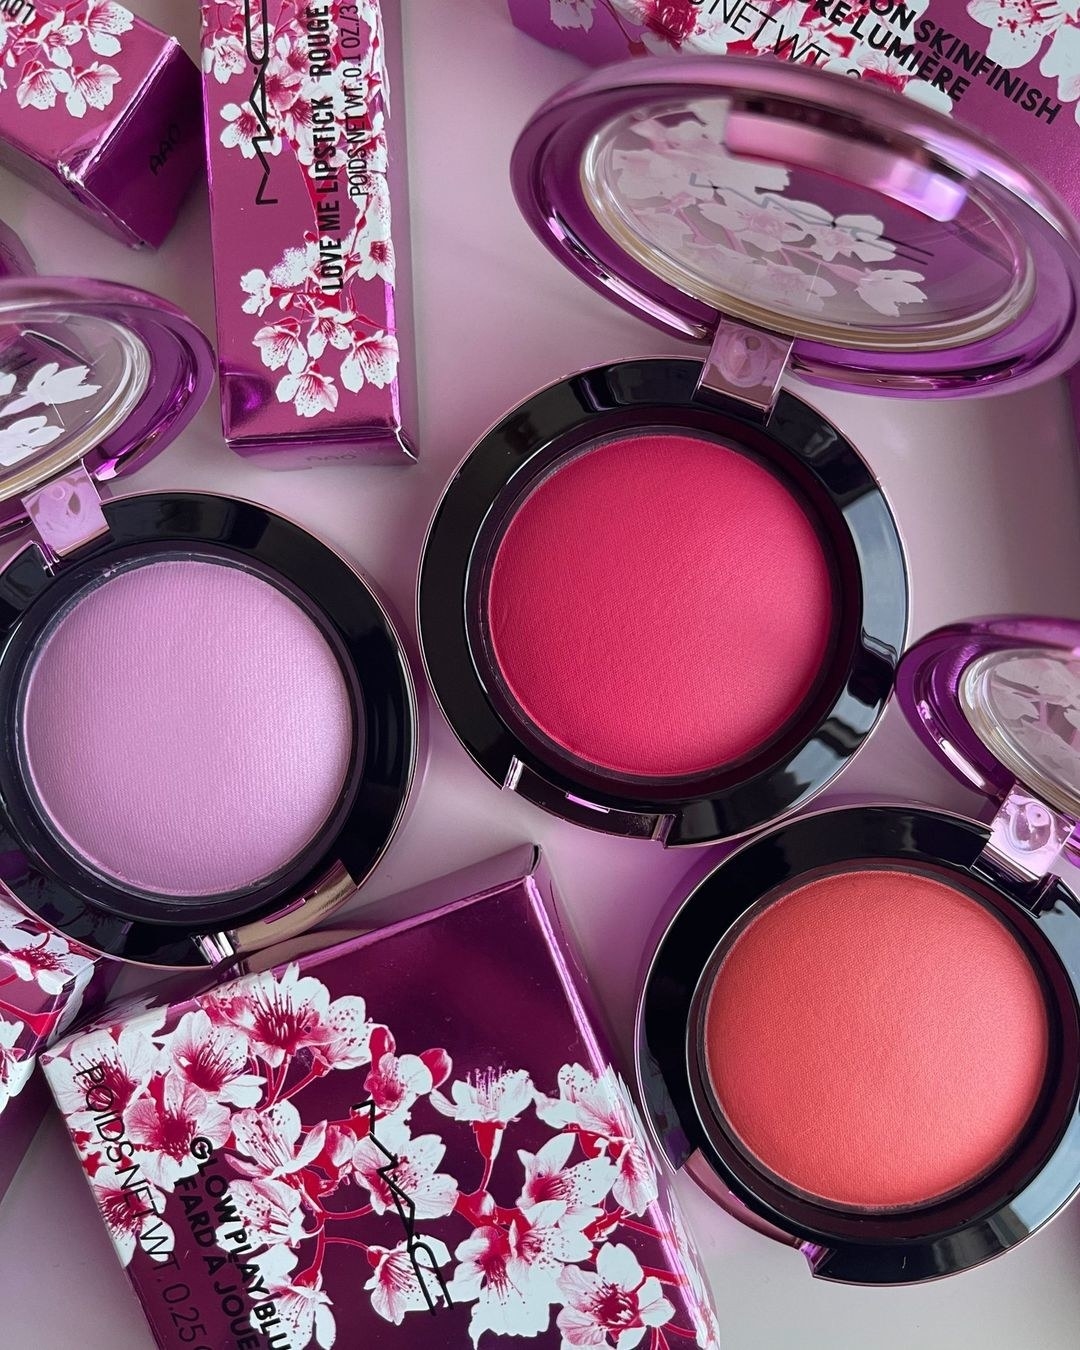 Three blush compacts in a row